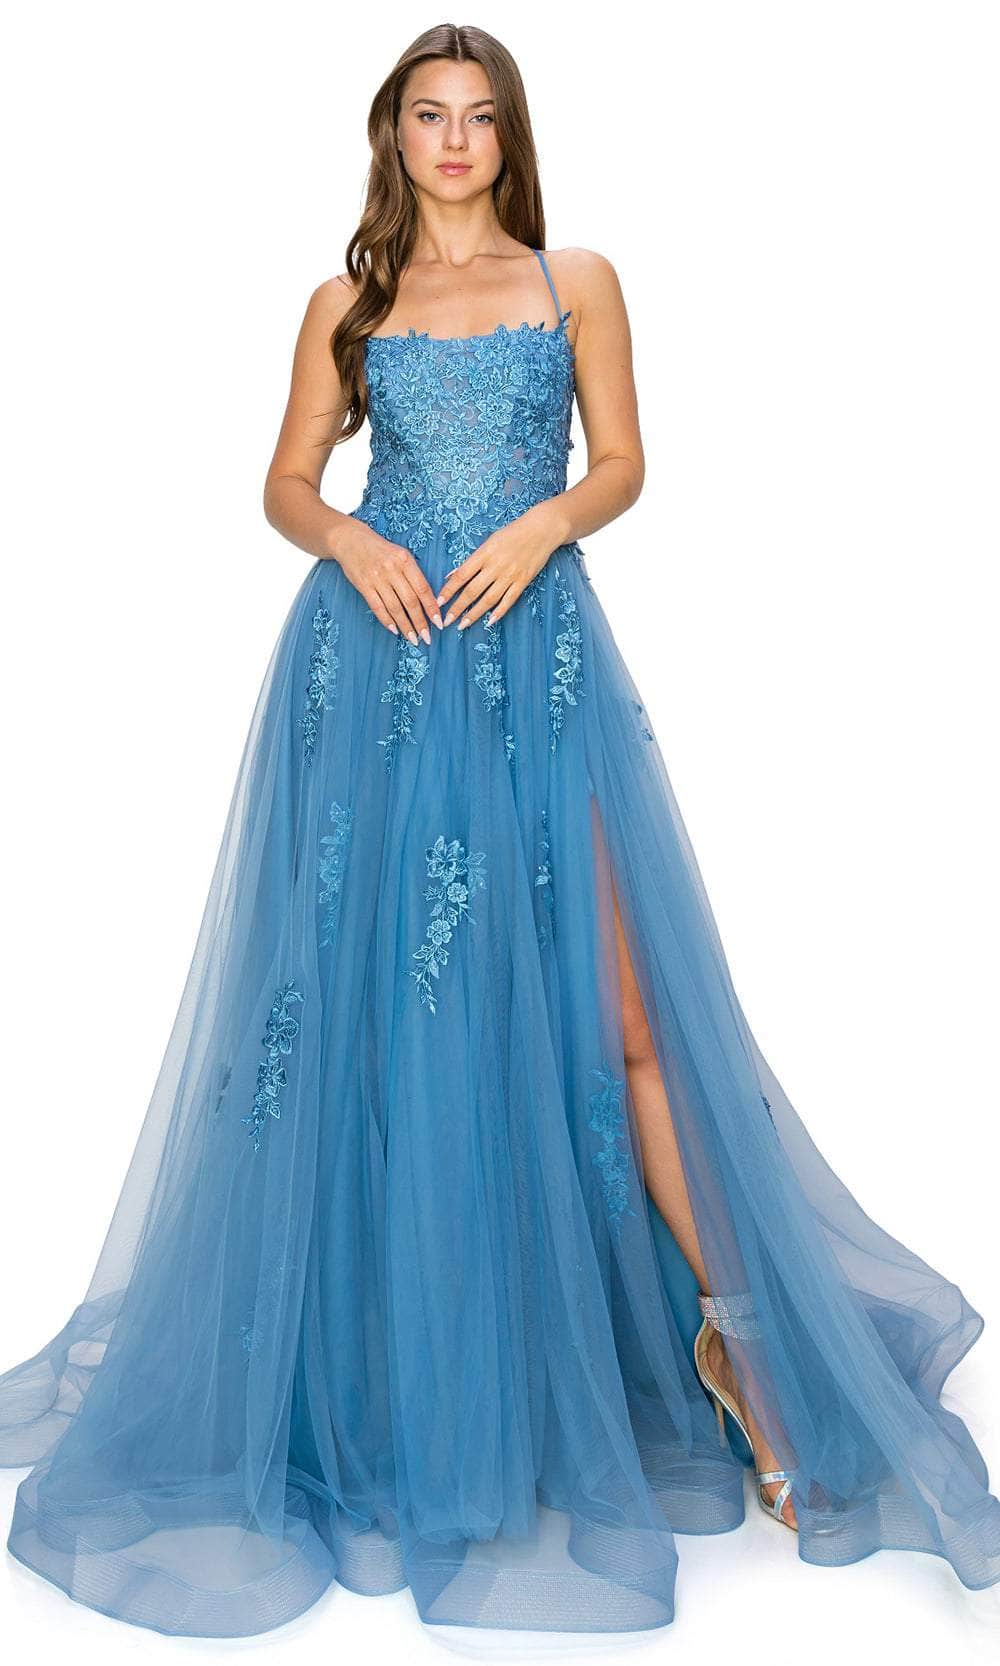 Cinderella Couture 8031J - Scoop A-Line Prom Gown Special Occasion Dress